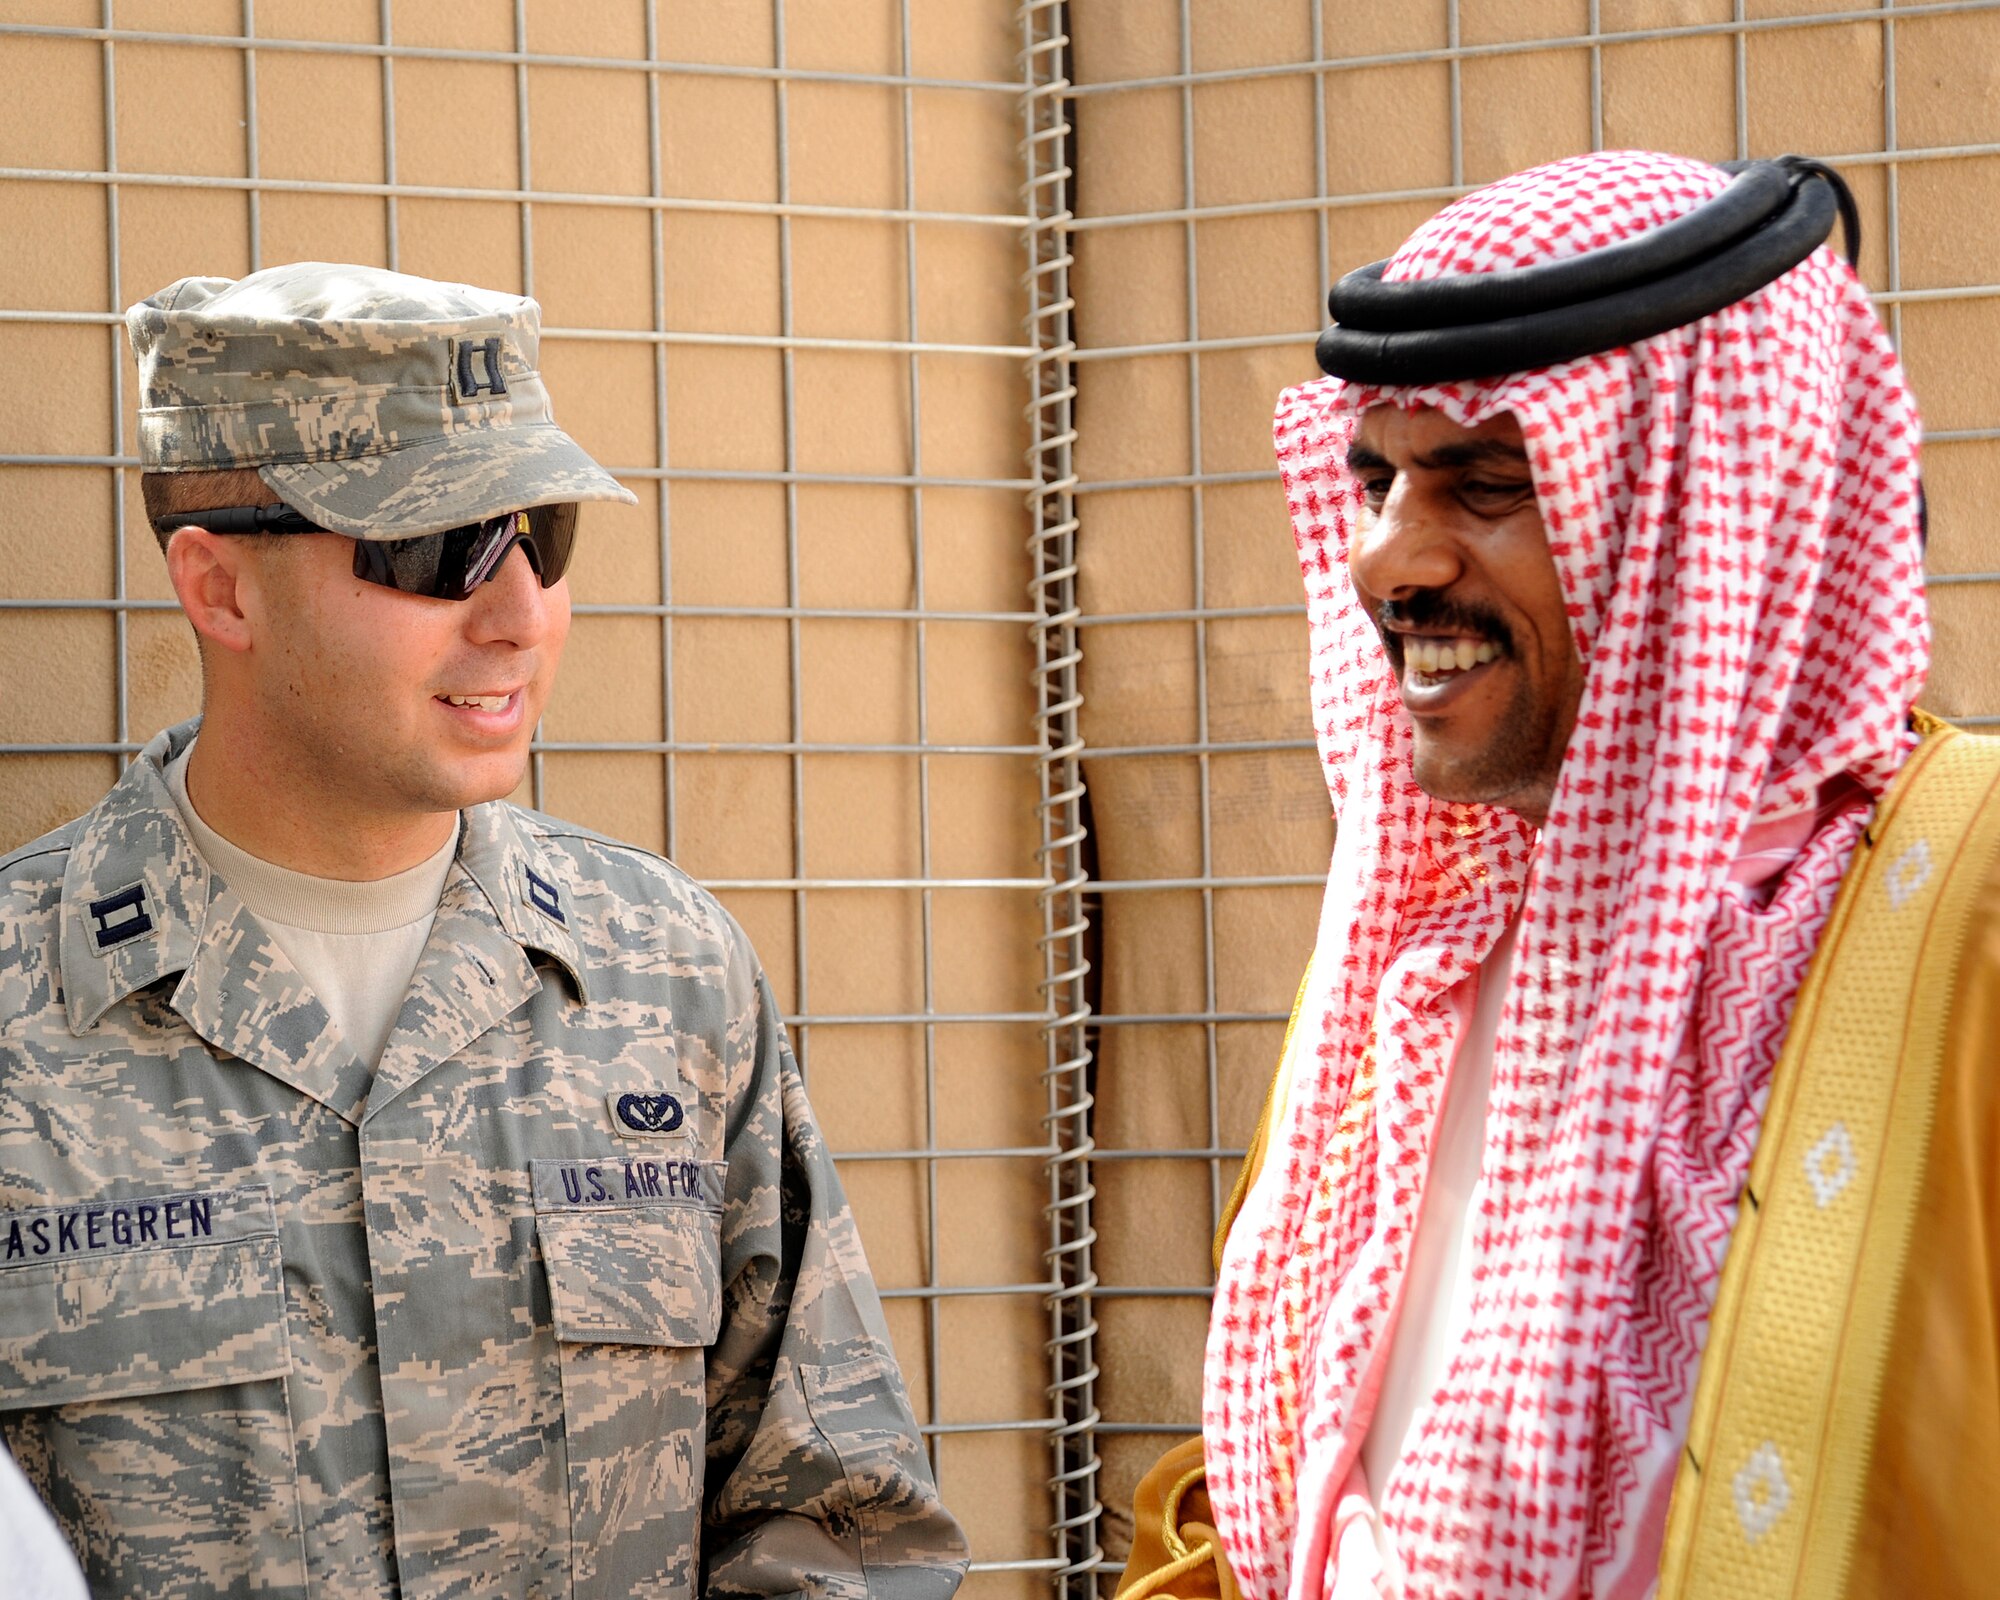 HAWR RAJAB, IRAQ -- U.S. Air Force Capt. Michael Askegren, Patrol Base Stone site officer in charge, left, talks with Sheik Mahier al-Mu'ini before the Village of Hope graduation ceremony in the city of Hawr Rajab, Iraq on Aug. 28. Askegren, a Mandeville, La. native, is deployed from the 823rd RED HORSE squadron, Hurlburt Field, Fla. where he is a project engineer. (U.S. Air Force photo/Staff Sgt. Paul Villanueva II)